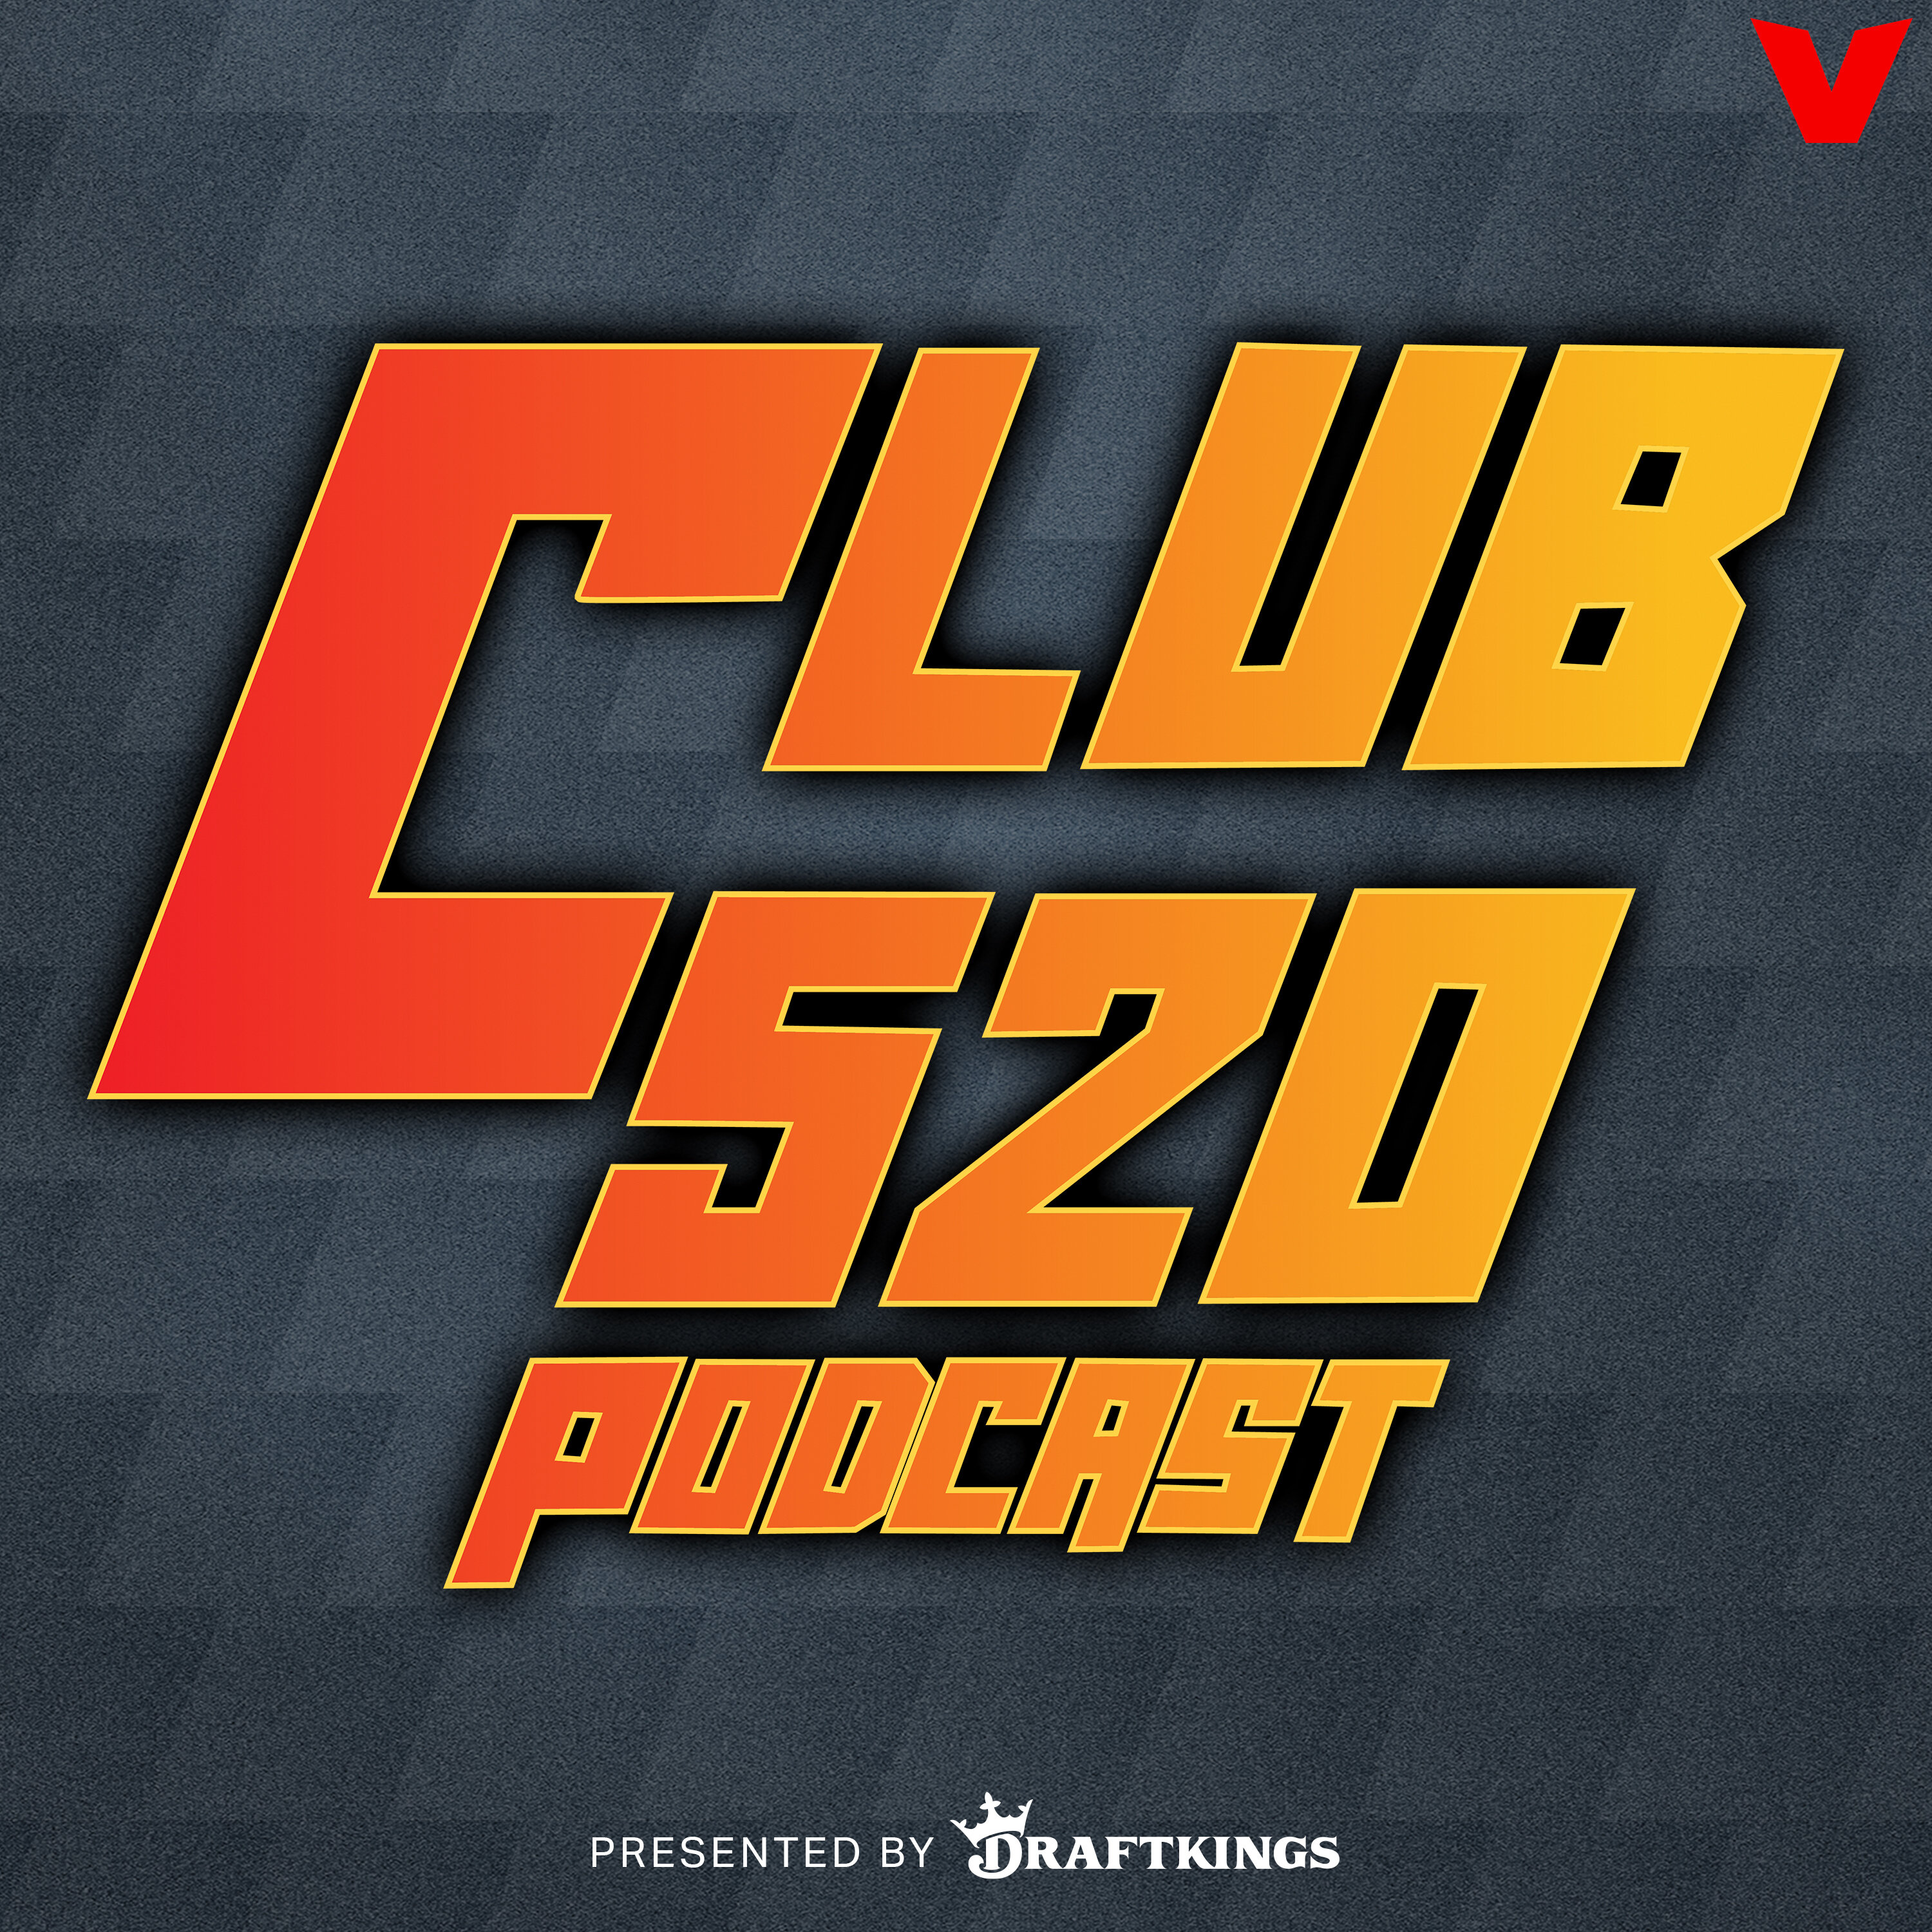 Club 520 - Jeff Teague predicts Bronny James will join LeBron & Lakers + CRAZY Kevin Garnett story by iHeartPodcasts and The Volume